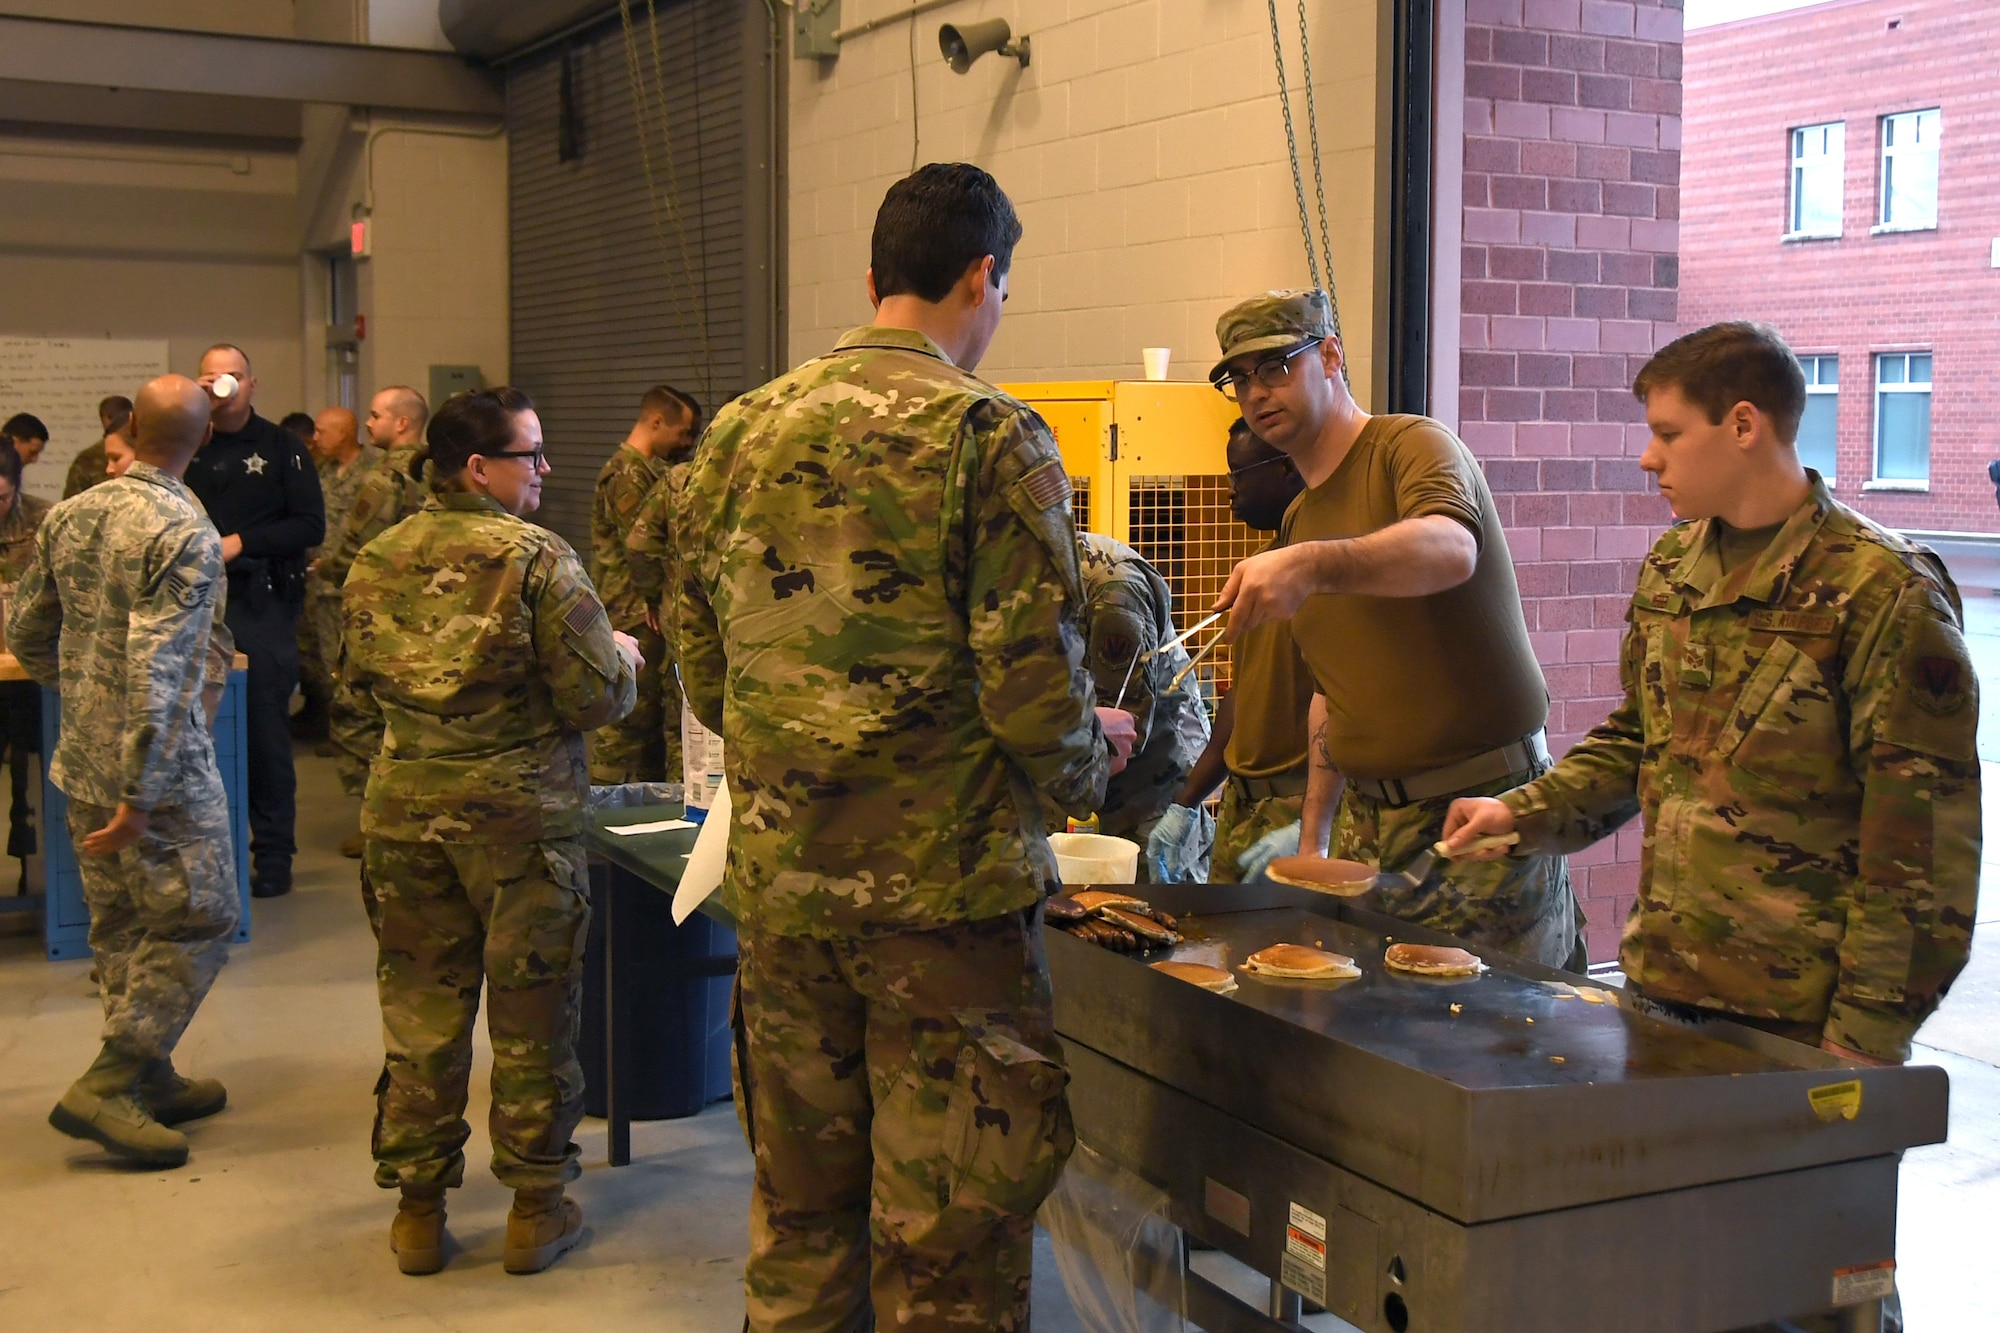 U.S. Air Force Senior Airman Robert Hartley (left), and other Airmen cook pancakes on a grill during a breakfast fundraiser, Jan. 12, 2020 at the 235th Air Traffic Control Squadron in New London, N.C. Members of the North Carolina Air National Guard as well as local airport authorities and law enforcement were invited to participate in a pancake breakfast social in order to strengthen community ties and build new relationships while raising funds for Morale, Welfare and Recreation.